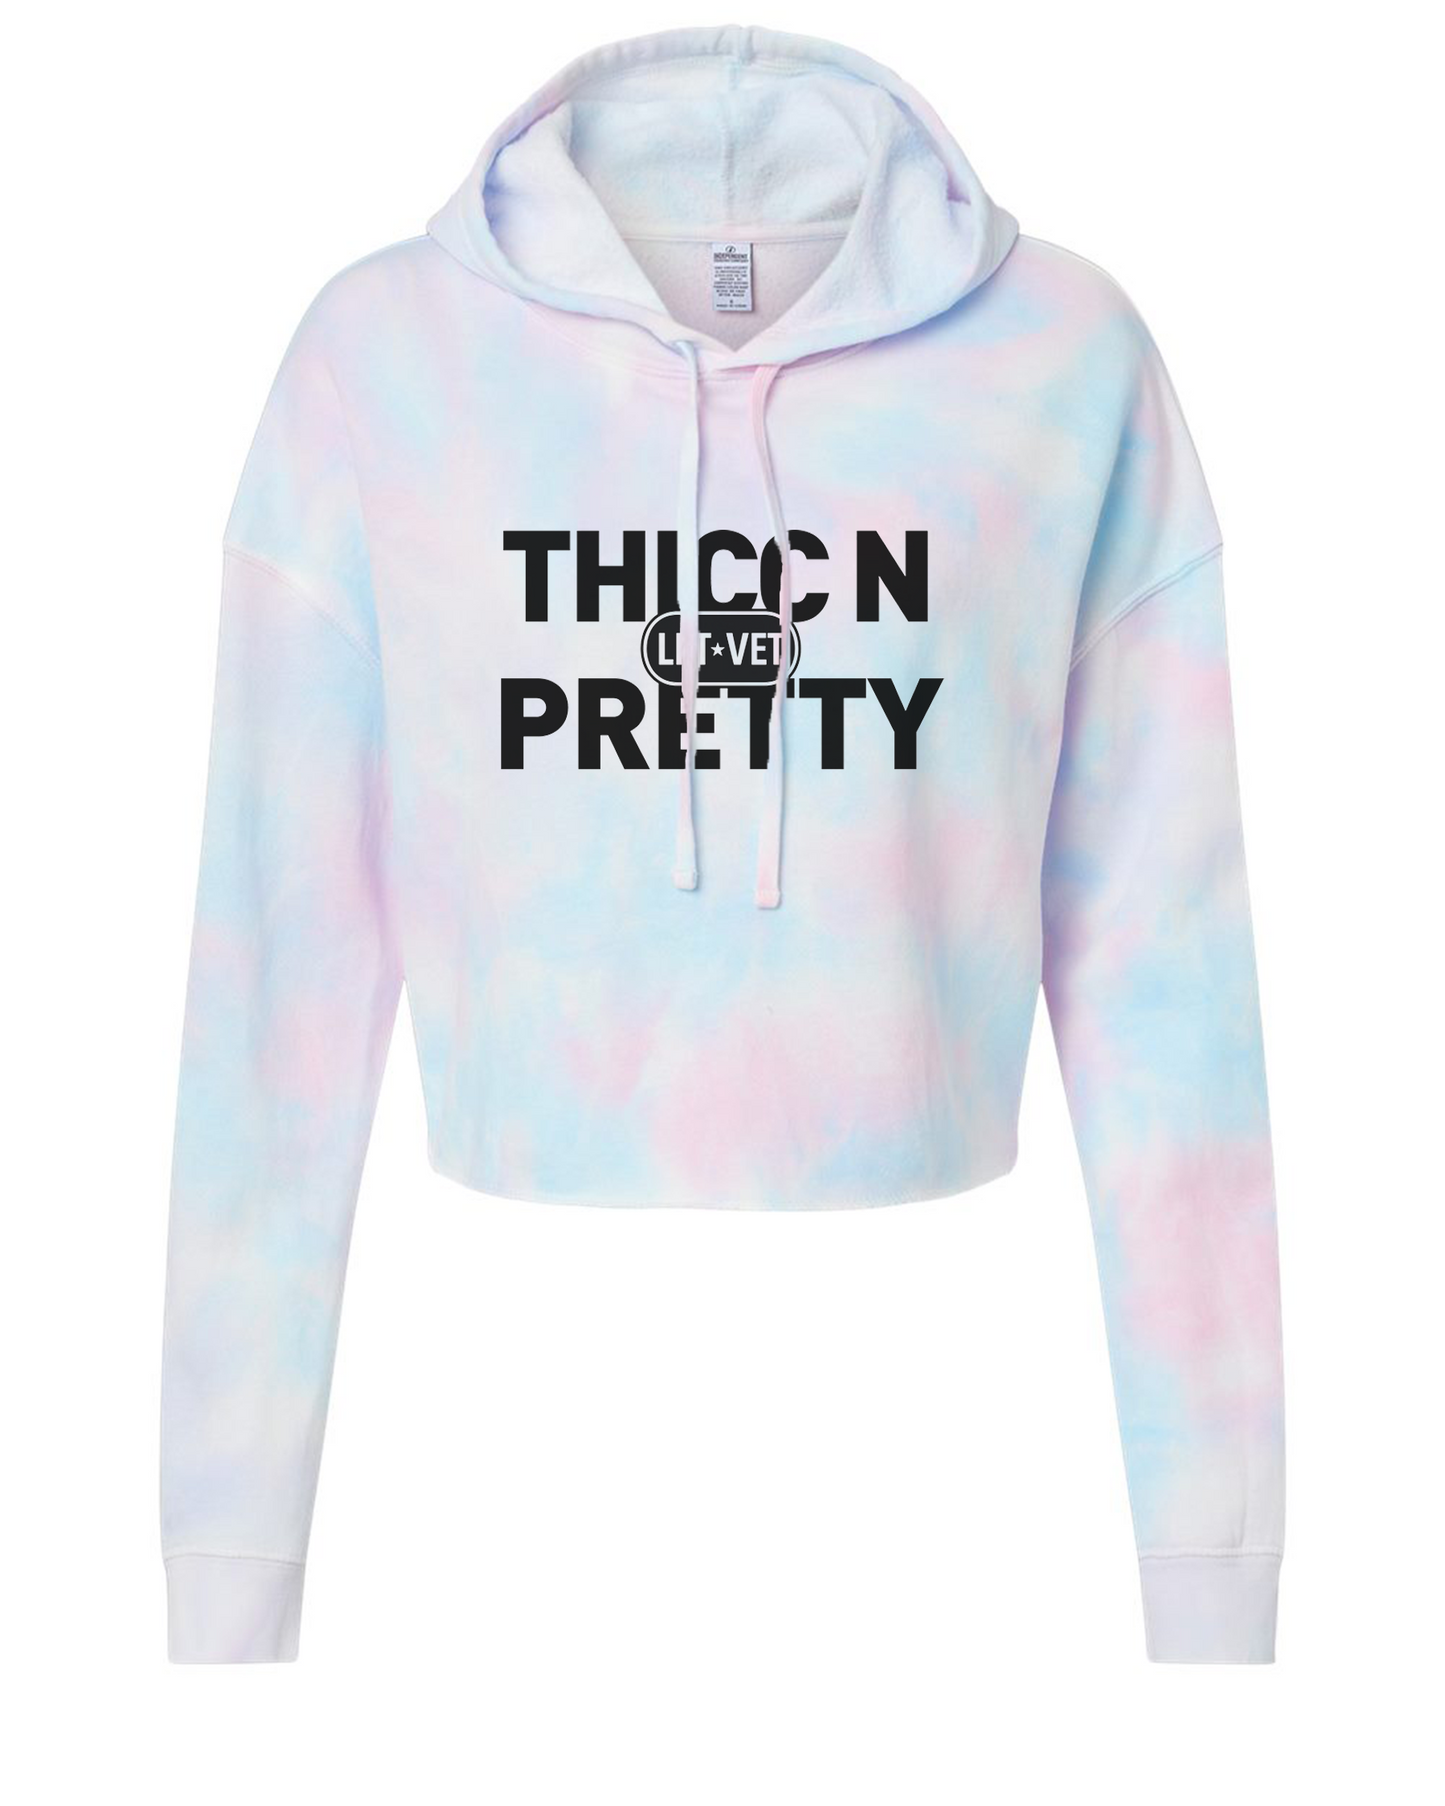 Thicc N Pretty Crop Hoodie- Cotton Candy